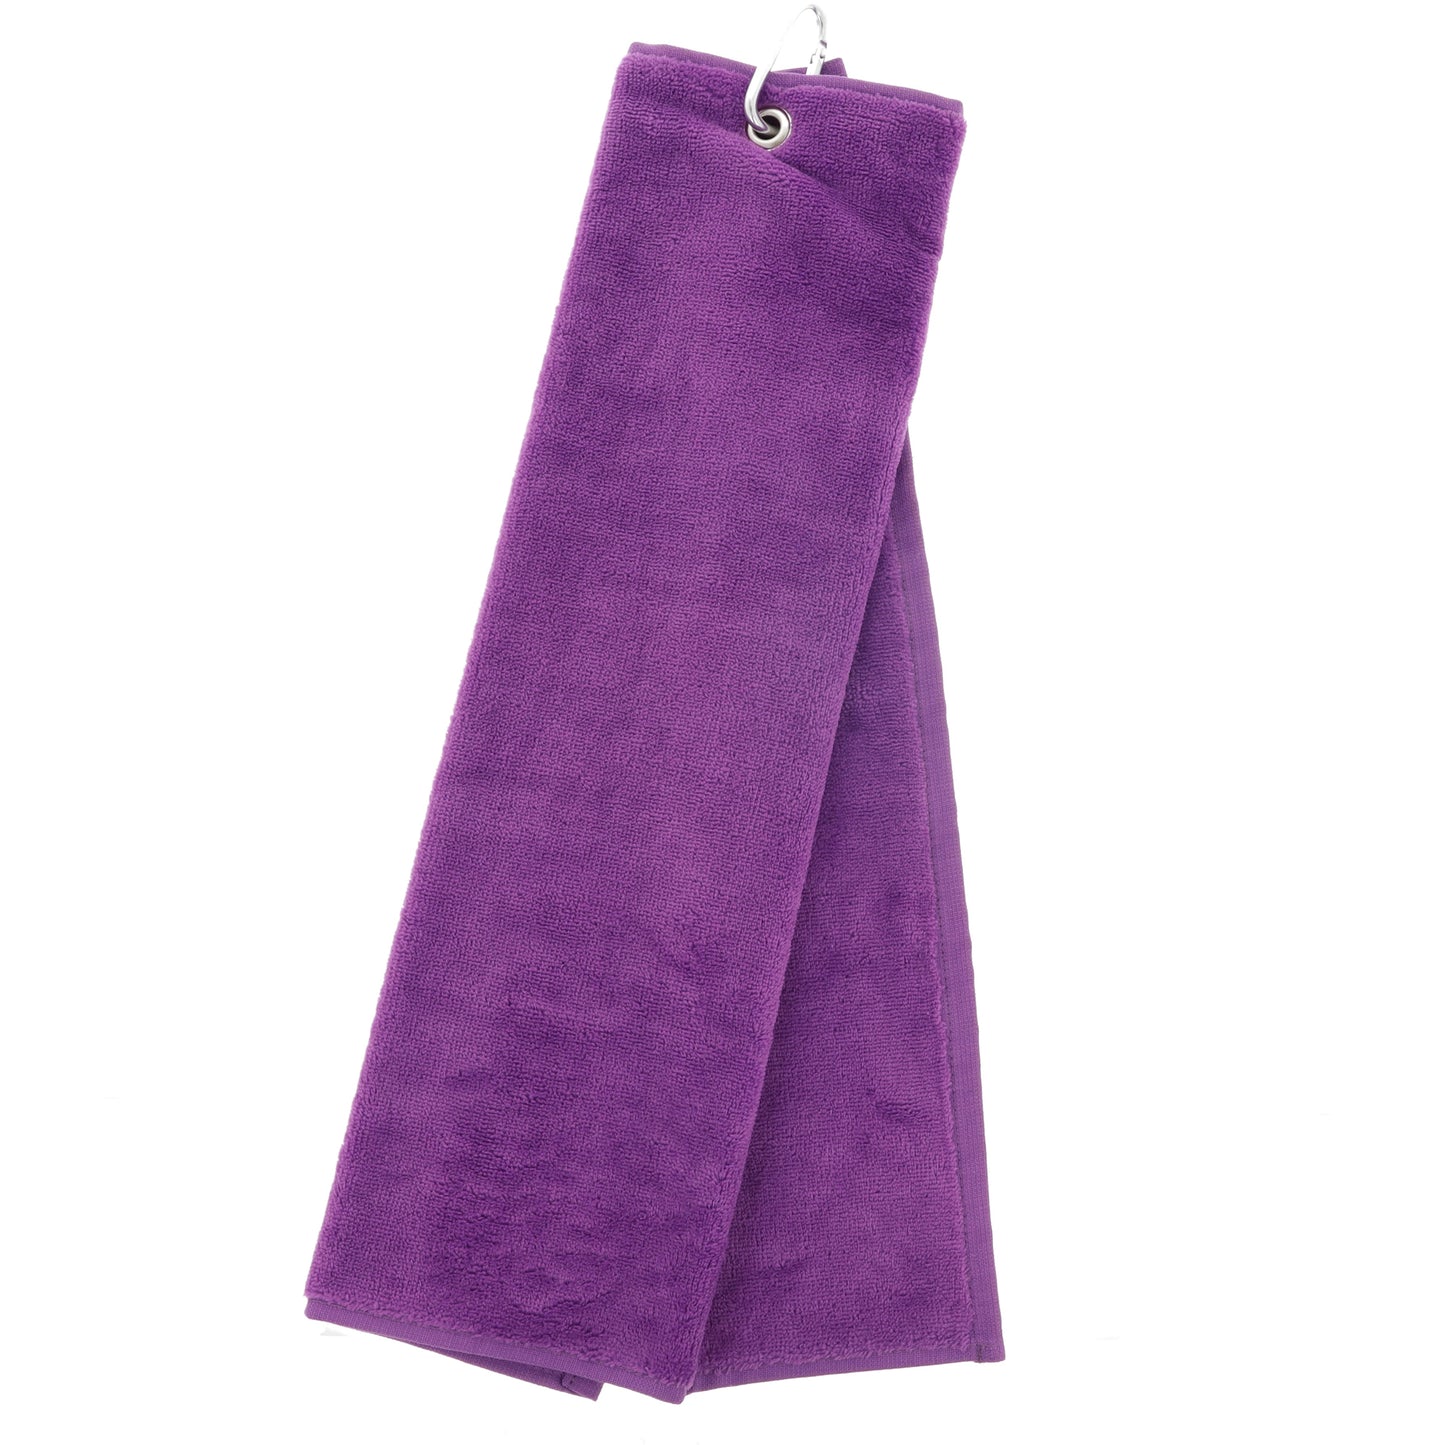 Personalised Embroidered Tri Fold TENNIS Towel Trifold with Carabiner Clip  - Always Looking Good - Purple  